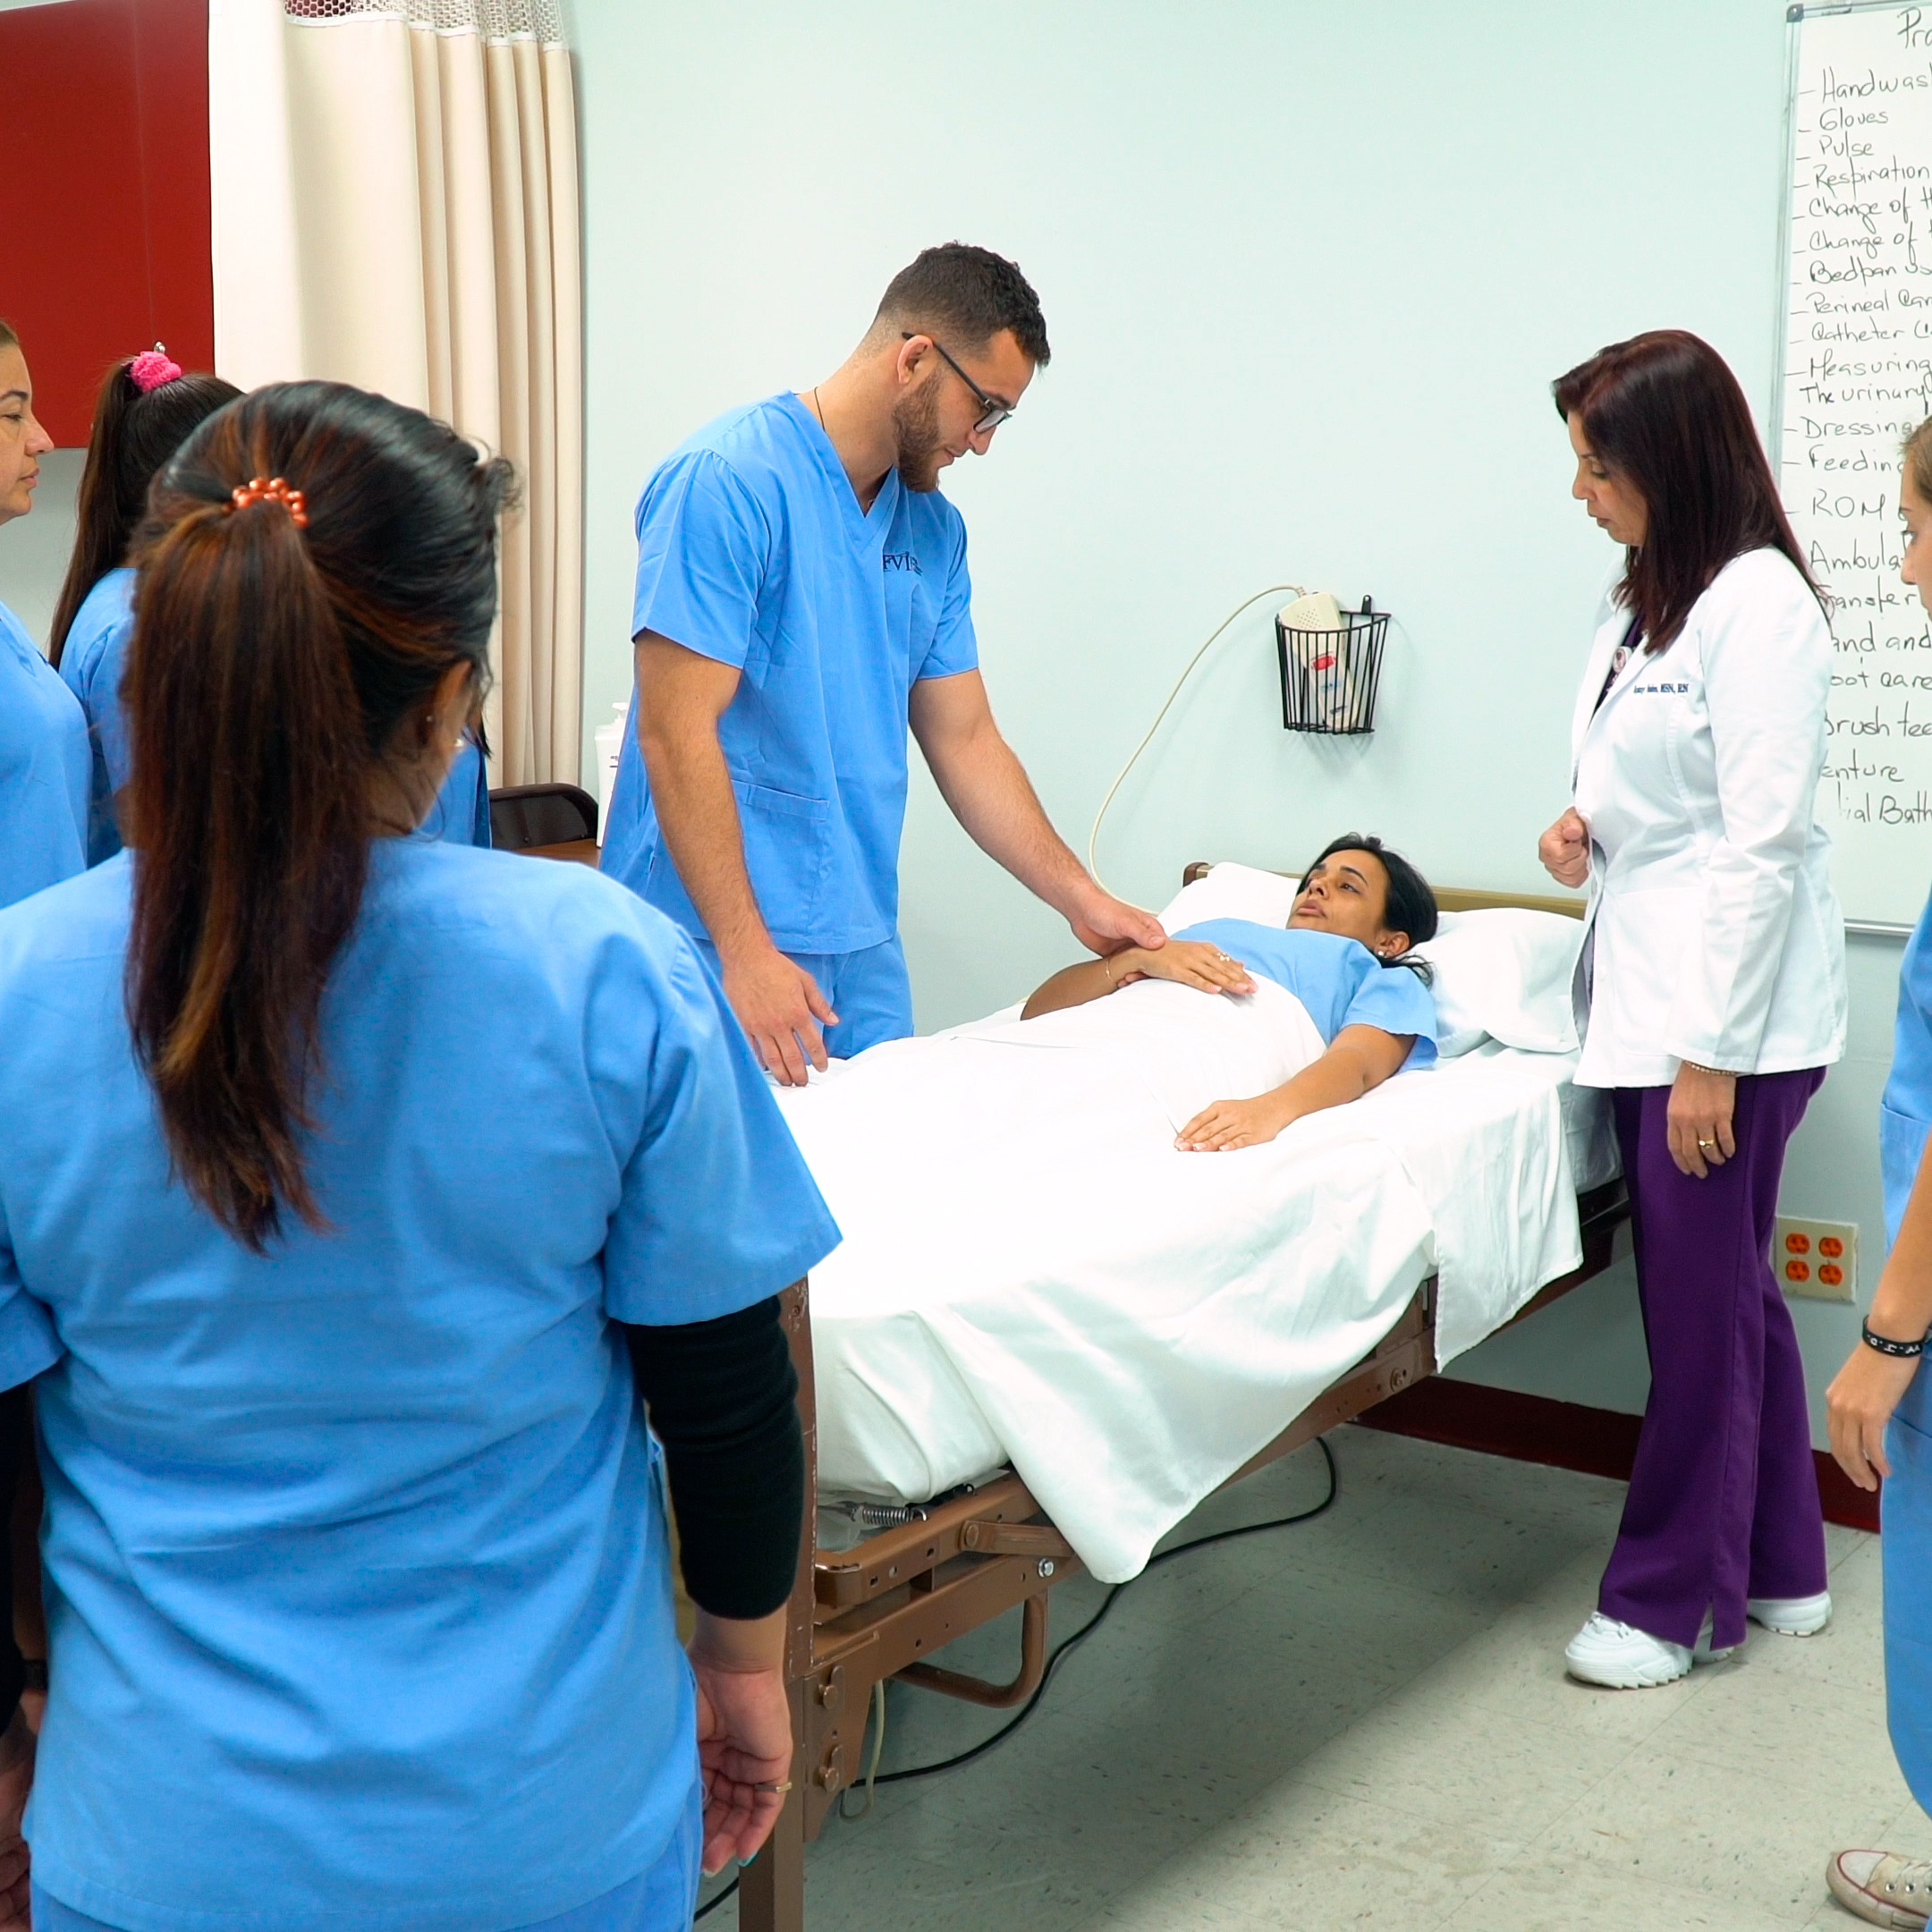 A student simulates a real world scenario with a fellow student in a hospital bed while an instructor and fellow classmates look on